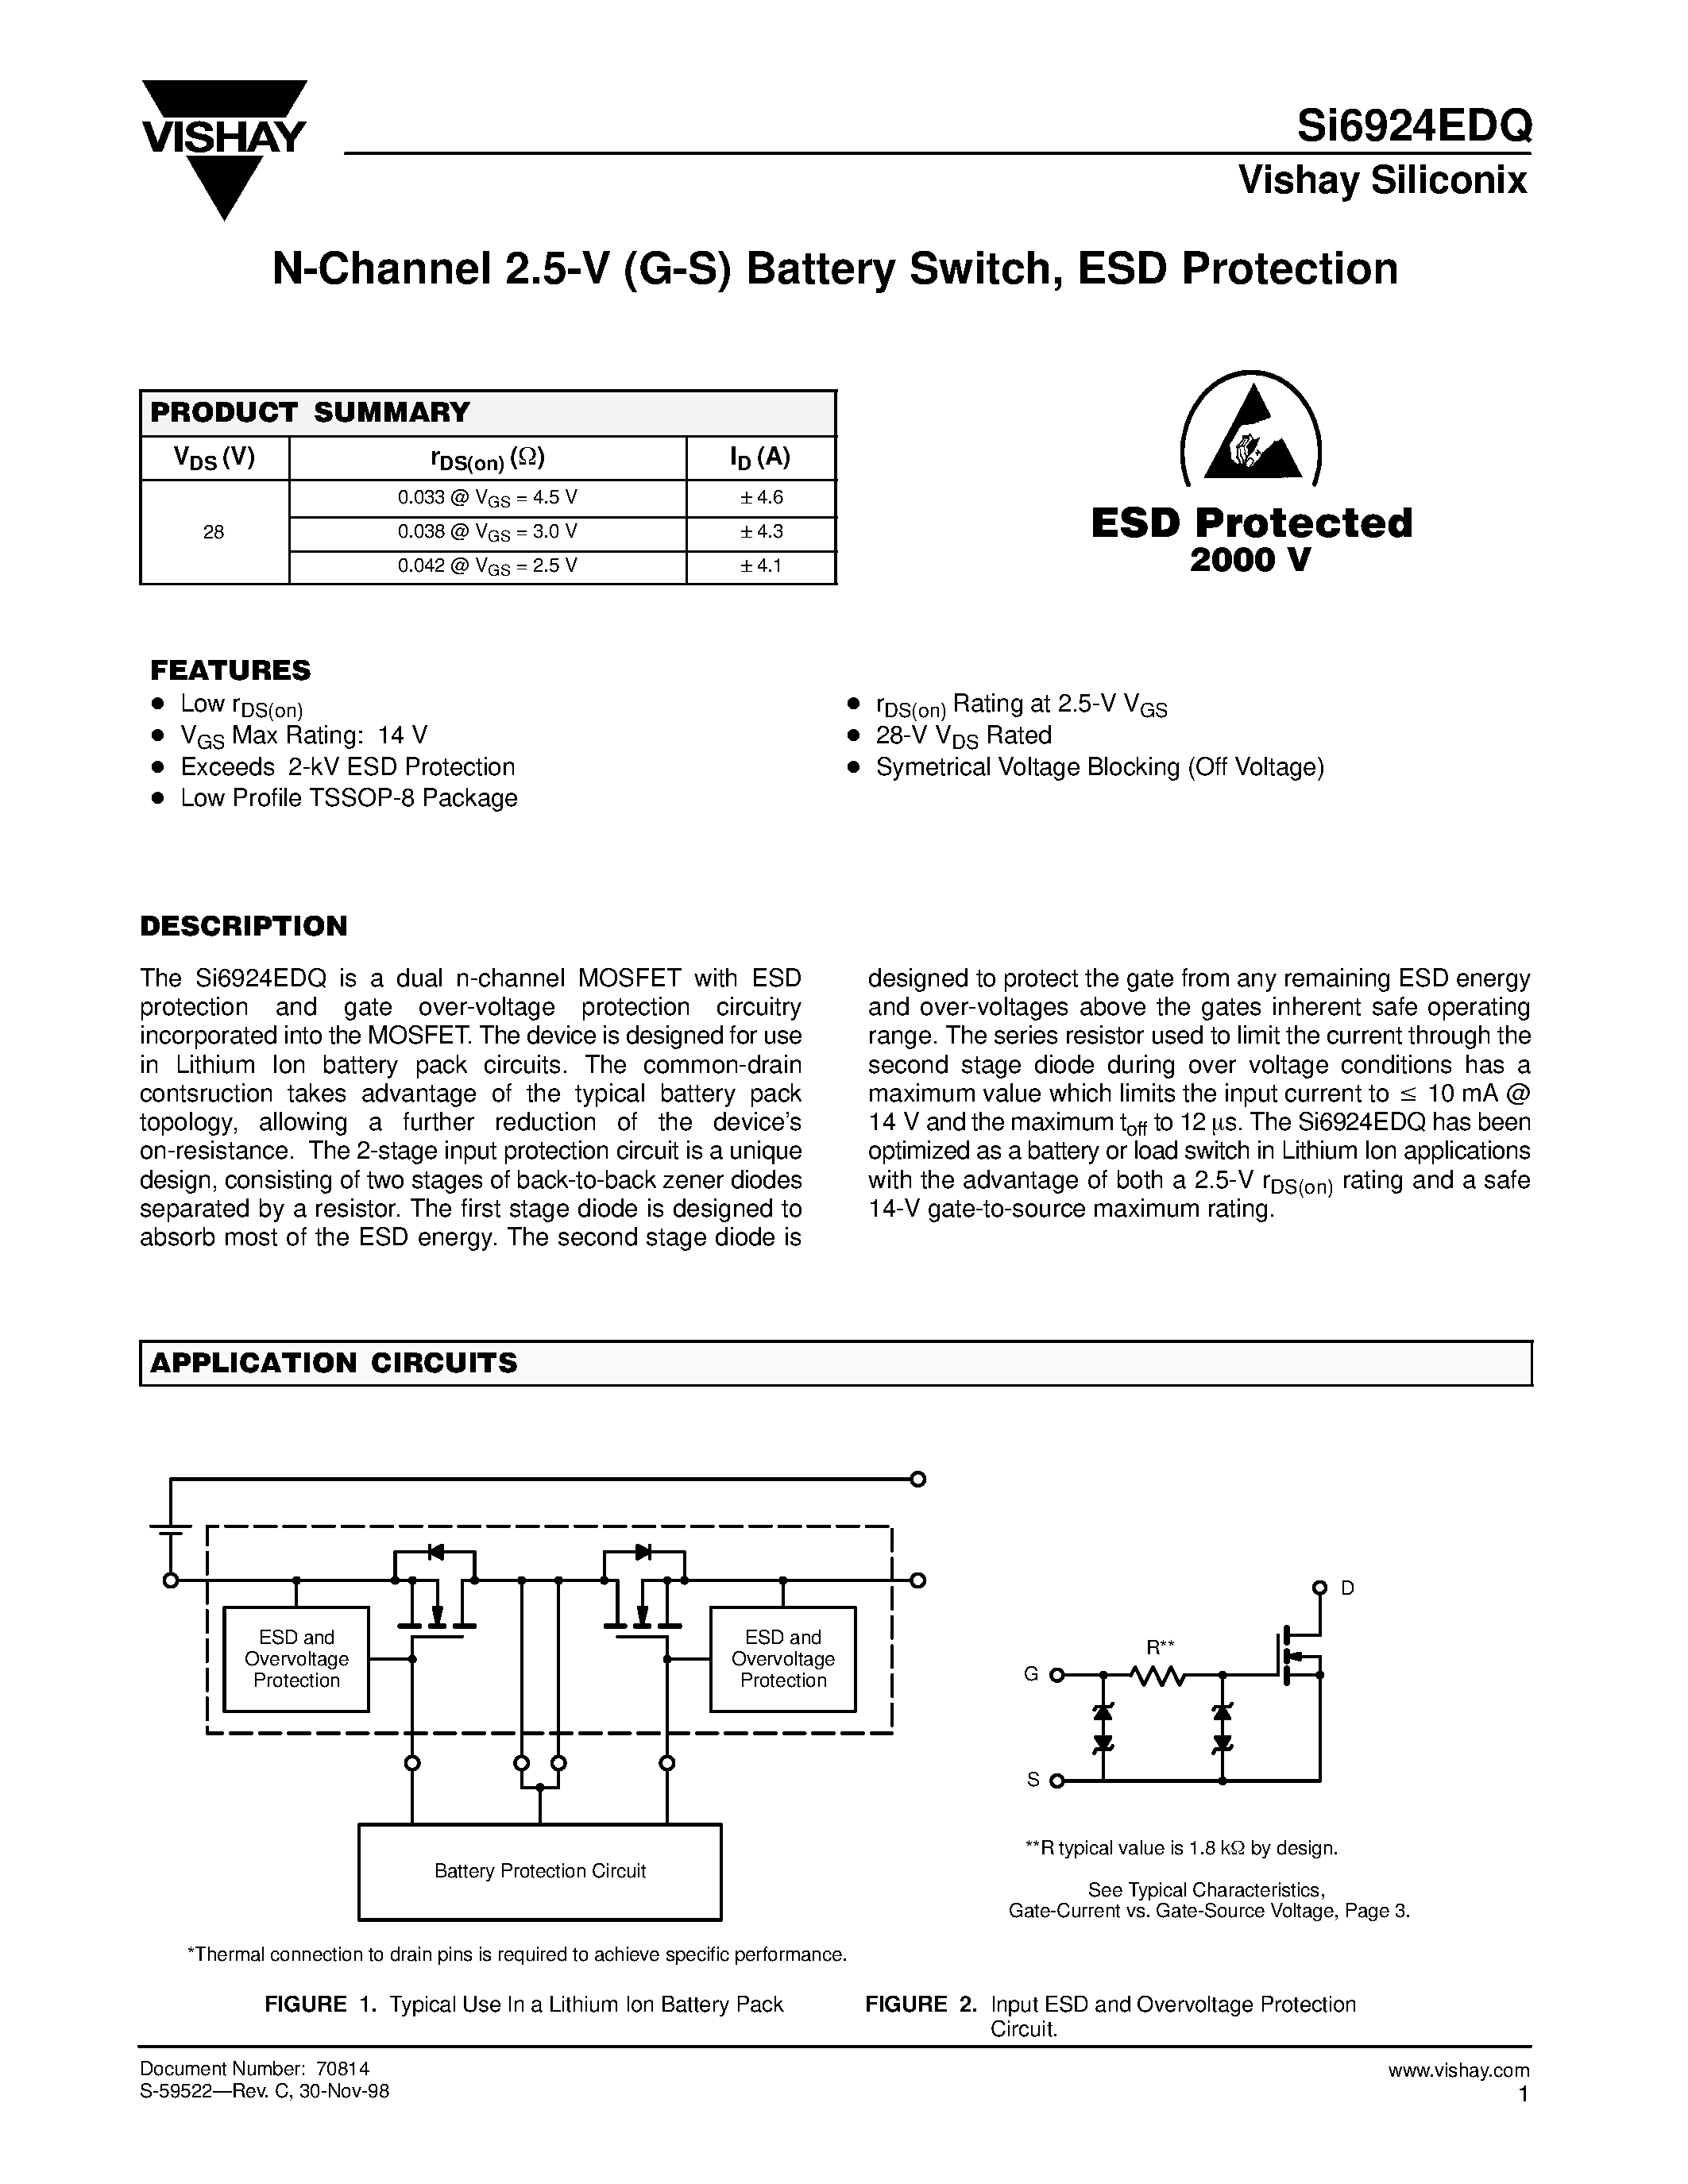 Даташит SI6924EDQ - N-Channel 2.5-V (G-S) Battery Switch/ ESD Protection страница 1